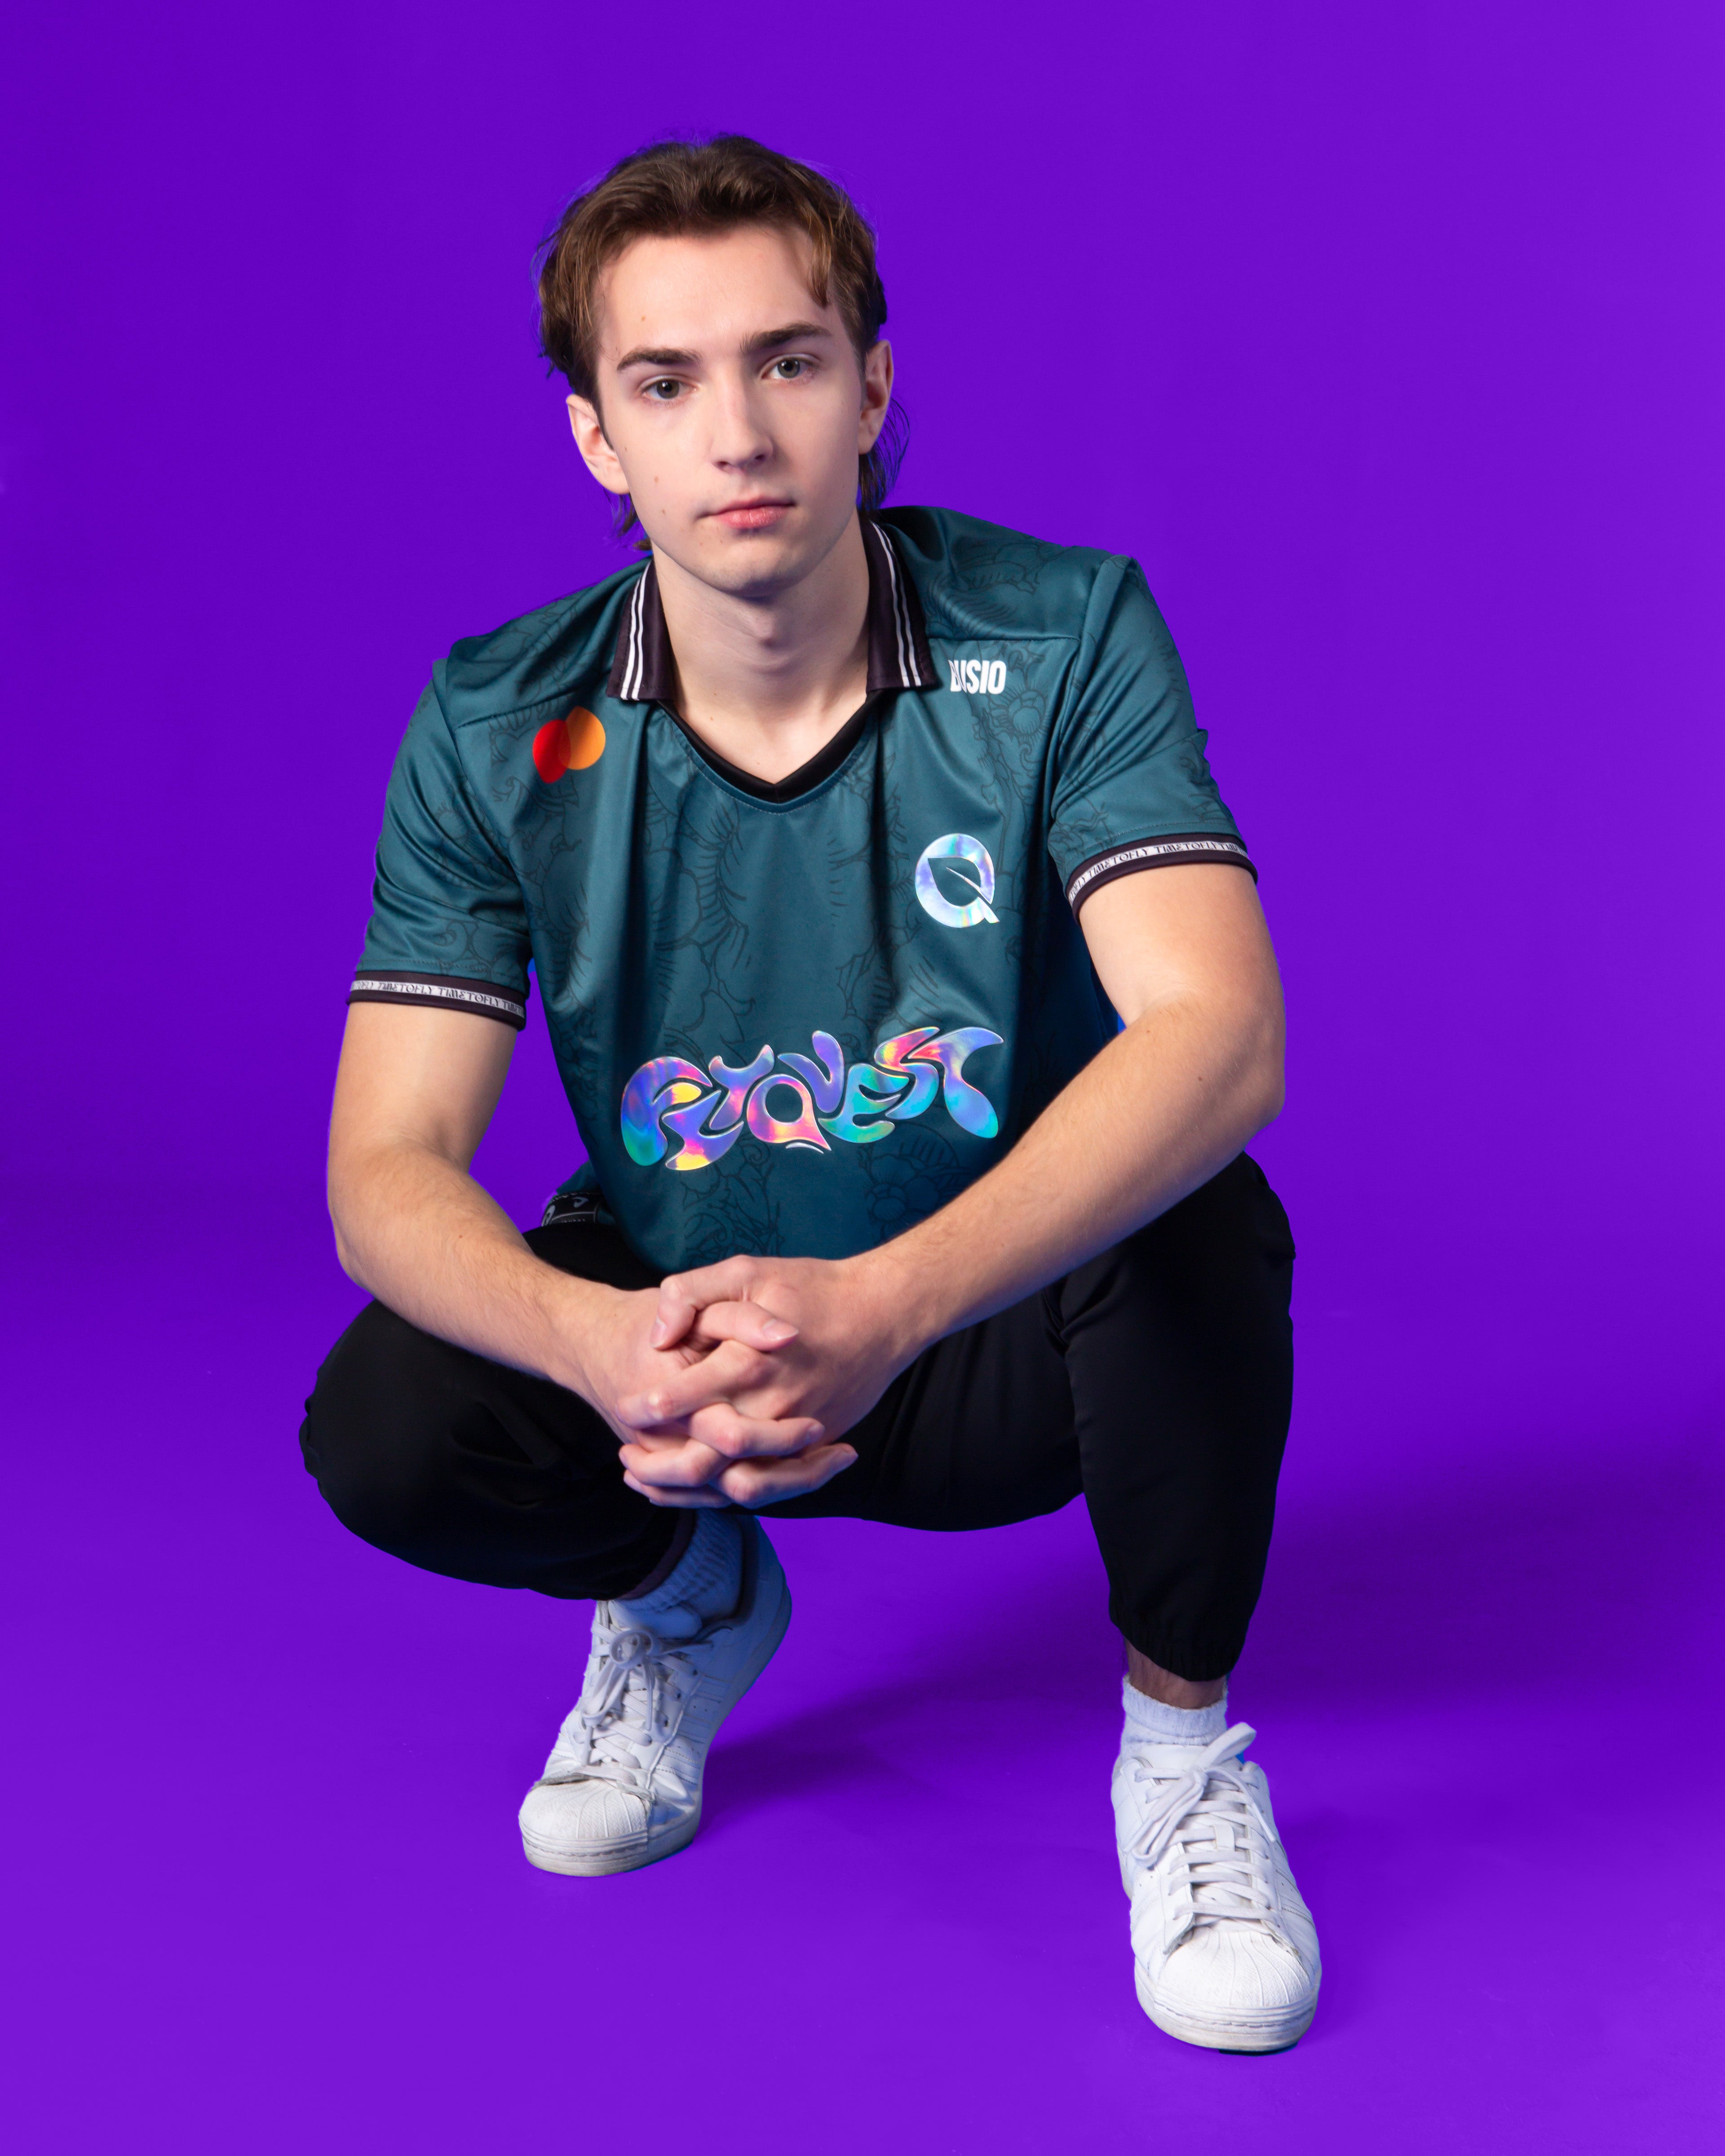 Busio - FlyQuest Atmos Jersey 2024